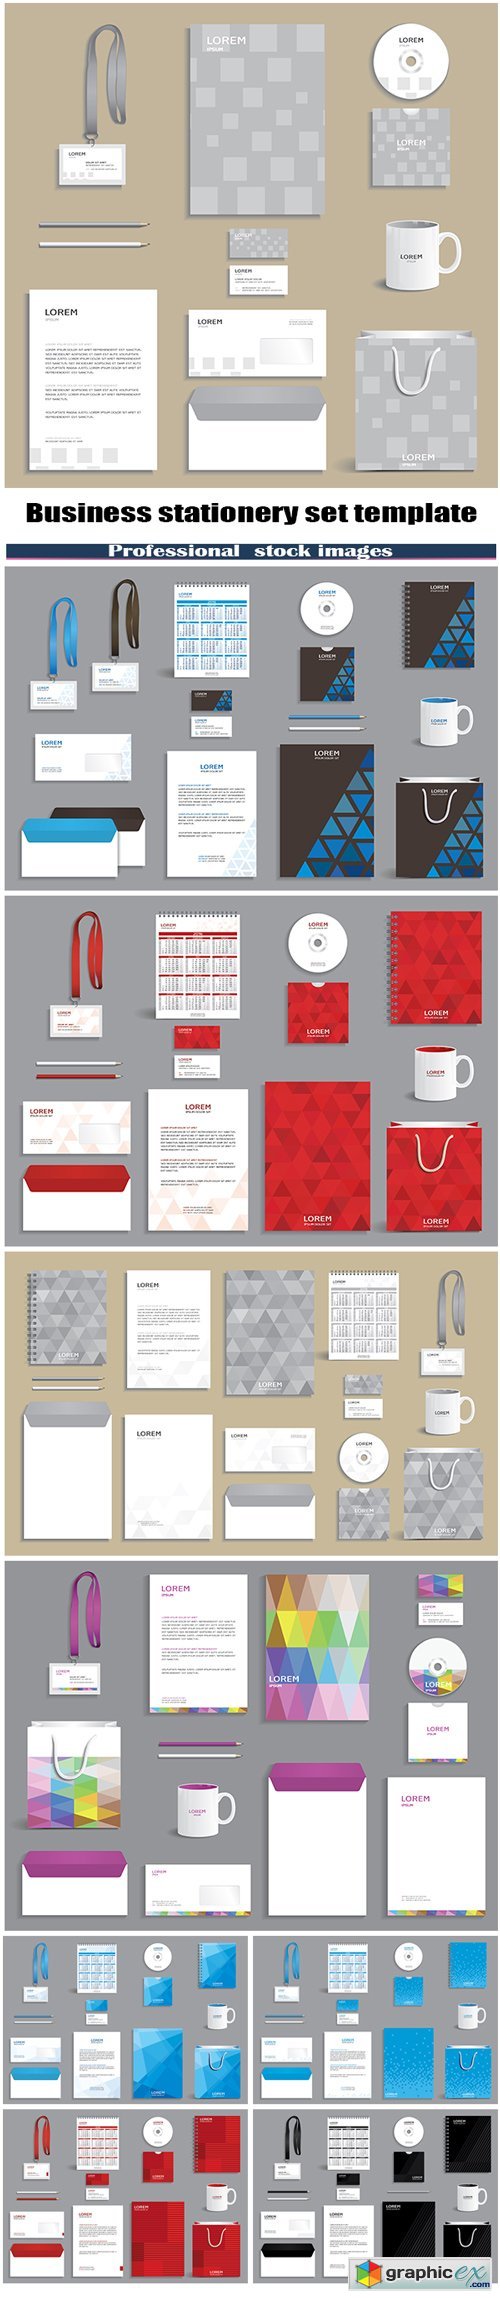 Business stationery set template